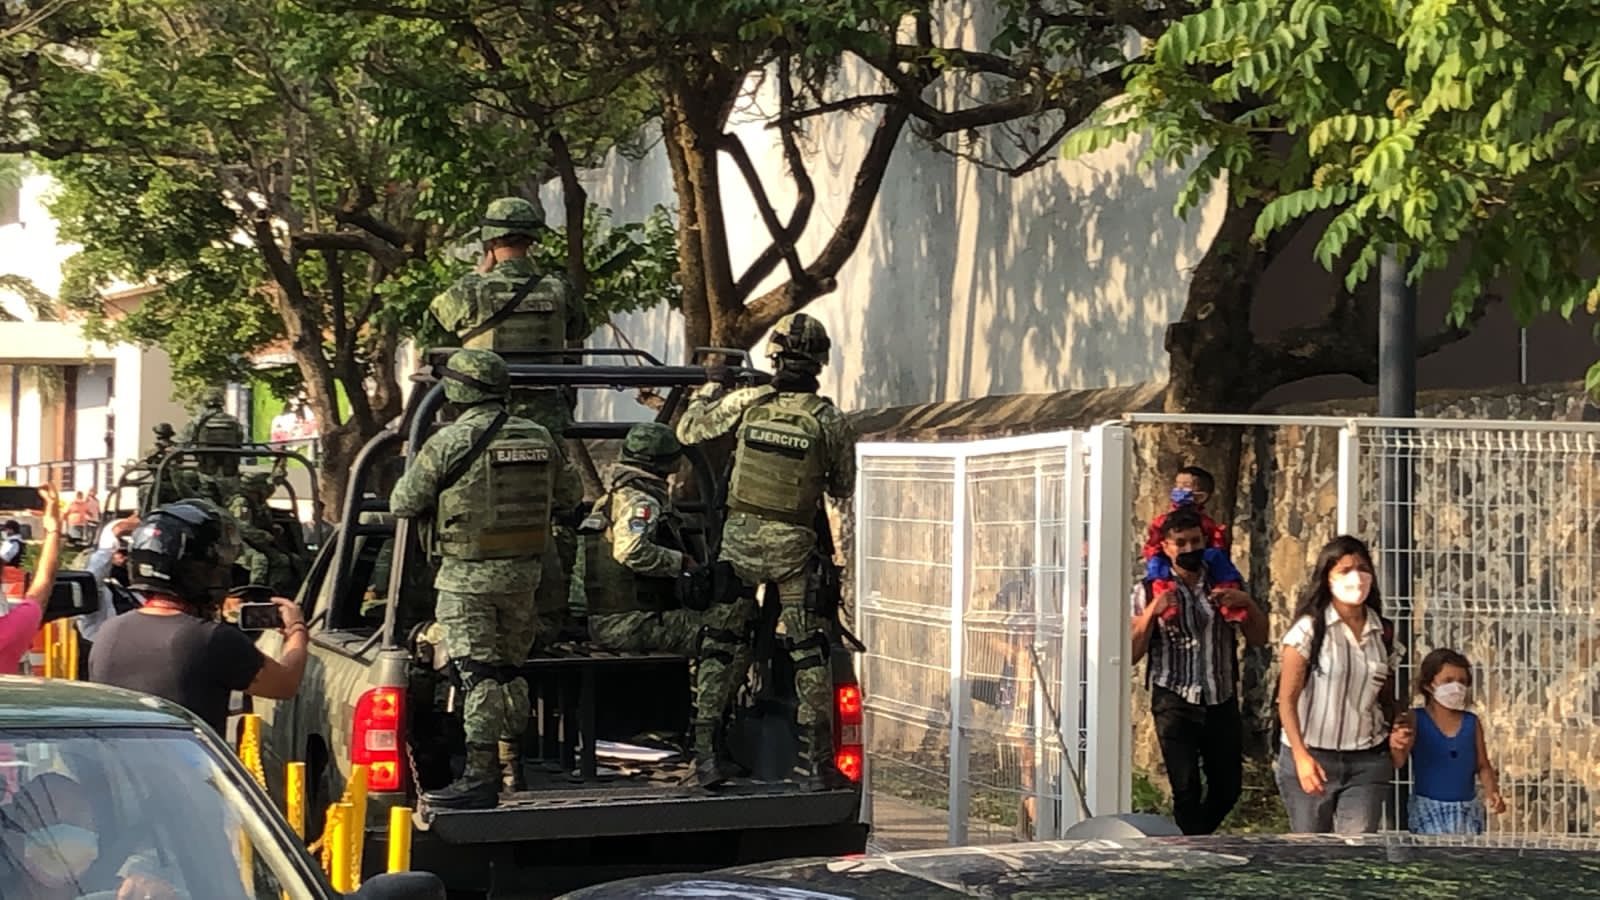 People in a vehicle were arrested for allegedly participating in events (Photo: Iradia Morelos)